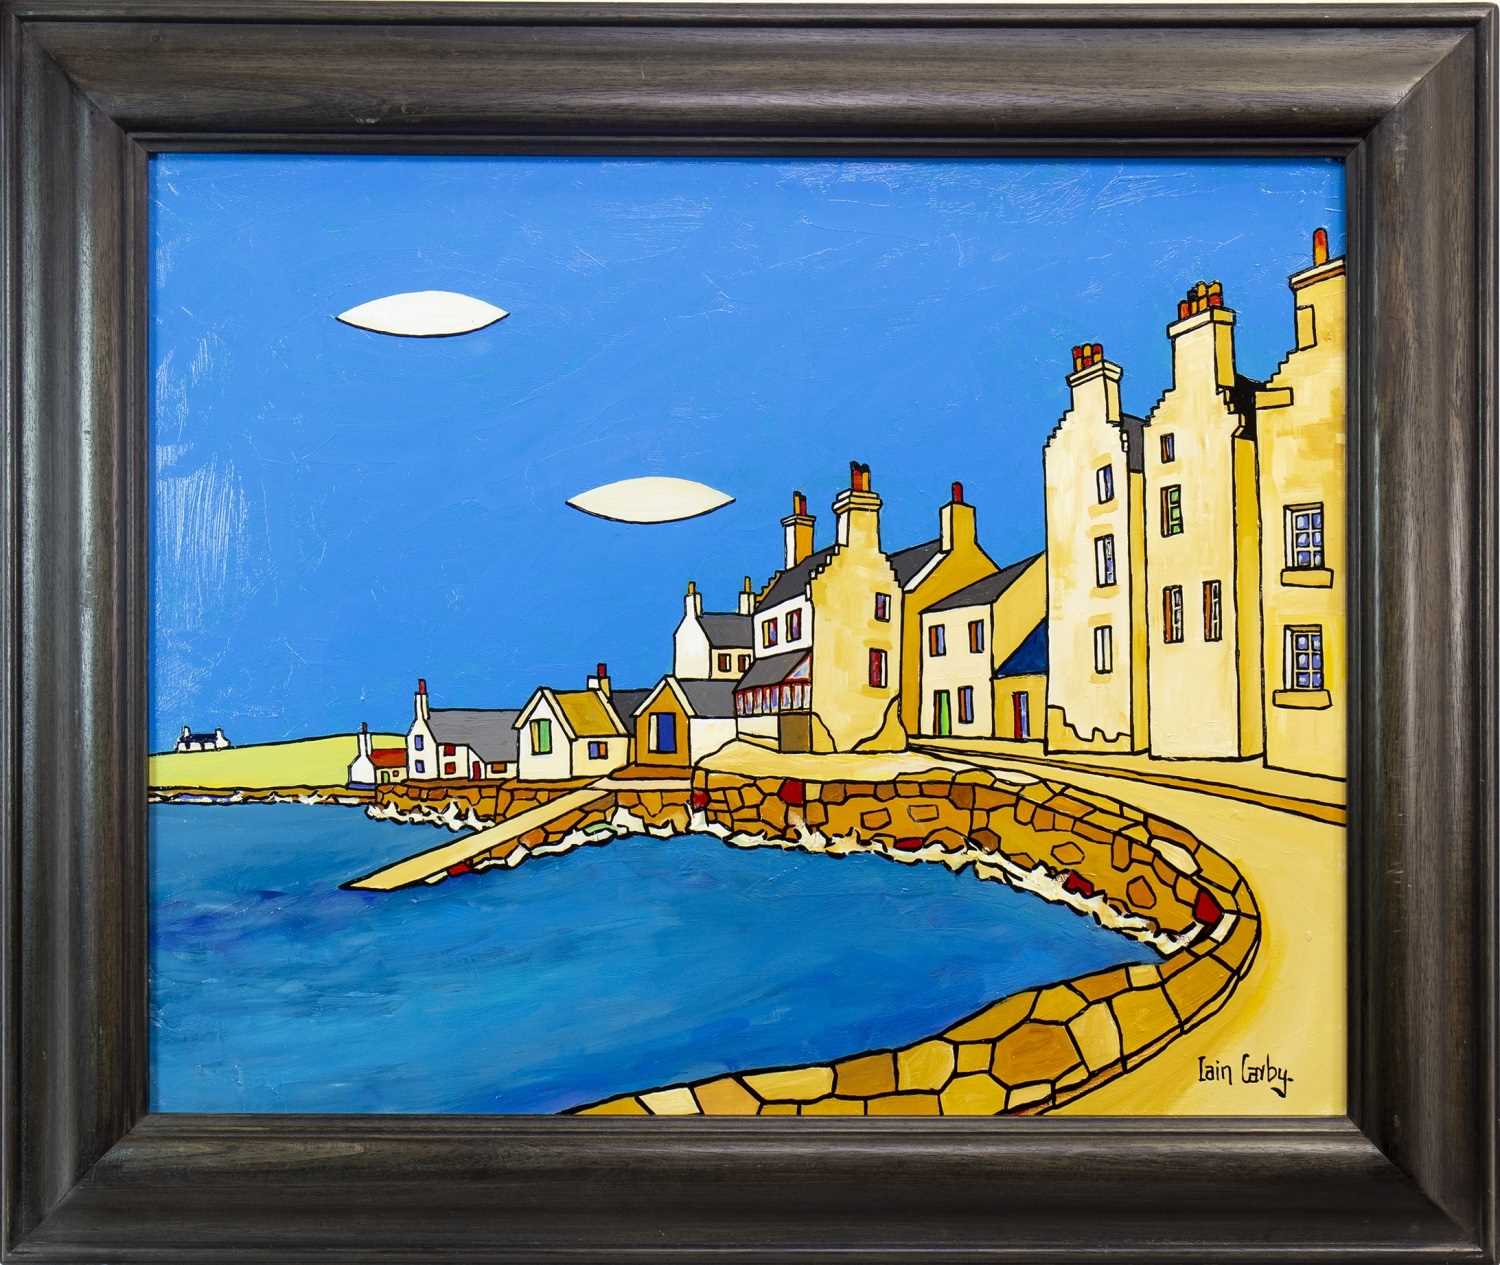 Lot 600 - ST MARGARET'S HOPE, AN OIL BY IAIN CARBY